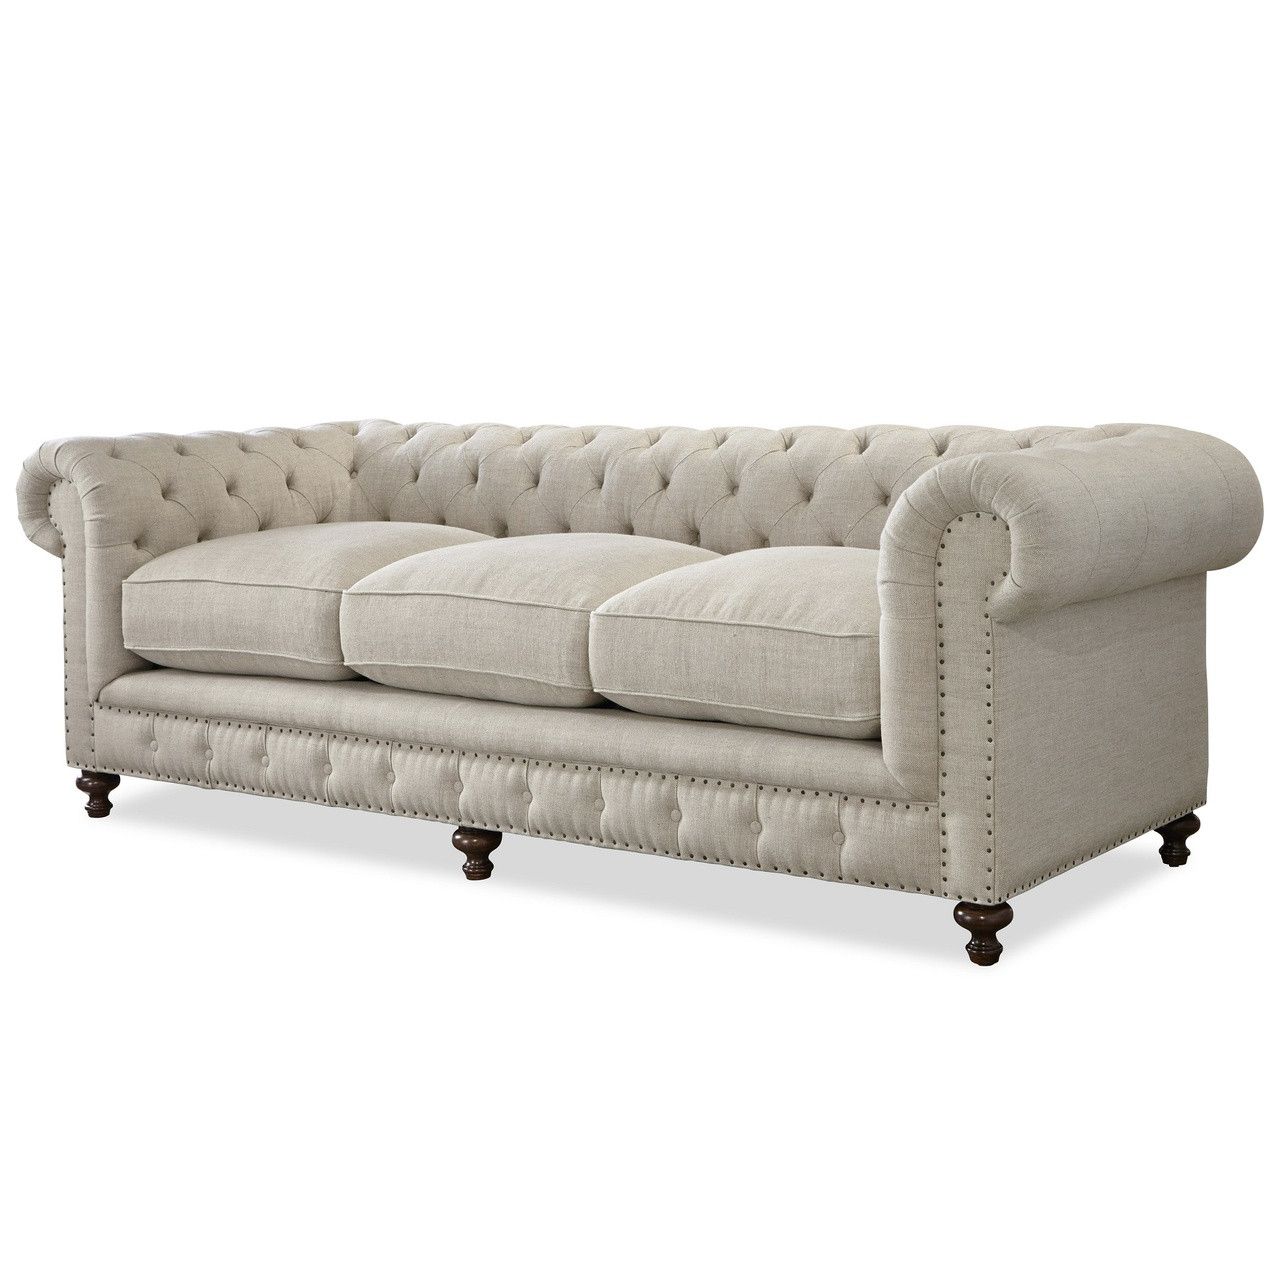 Featured Photo of 20 Best Ideas Tufted Upholstered Sofas